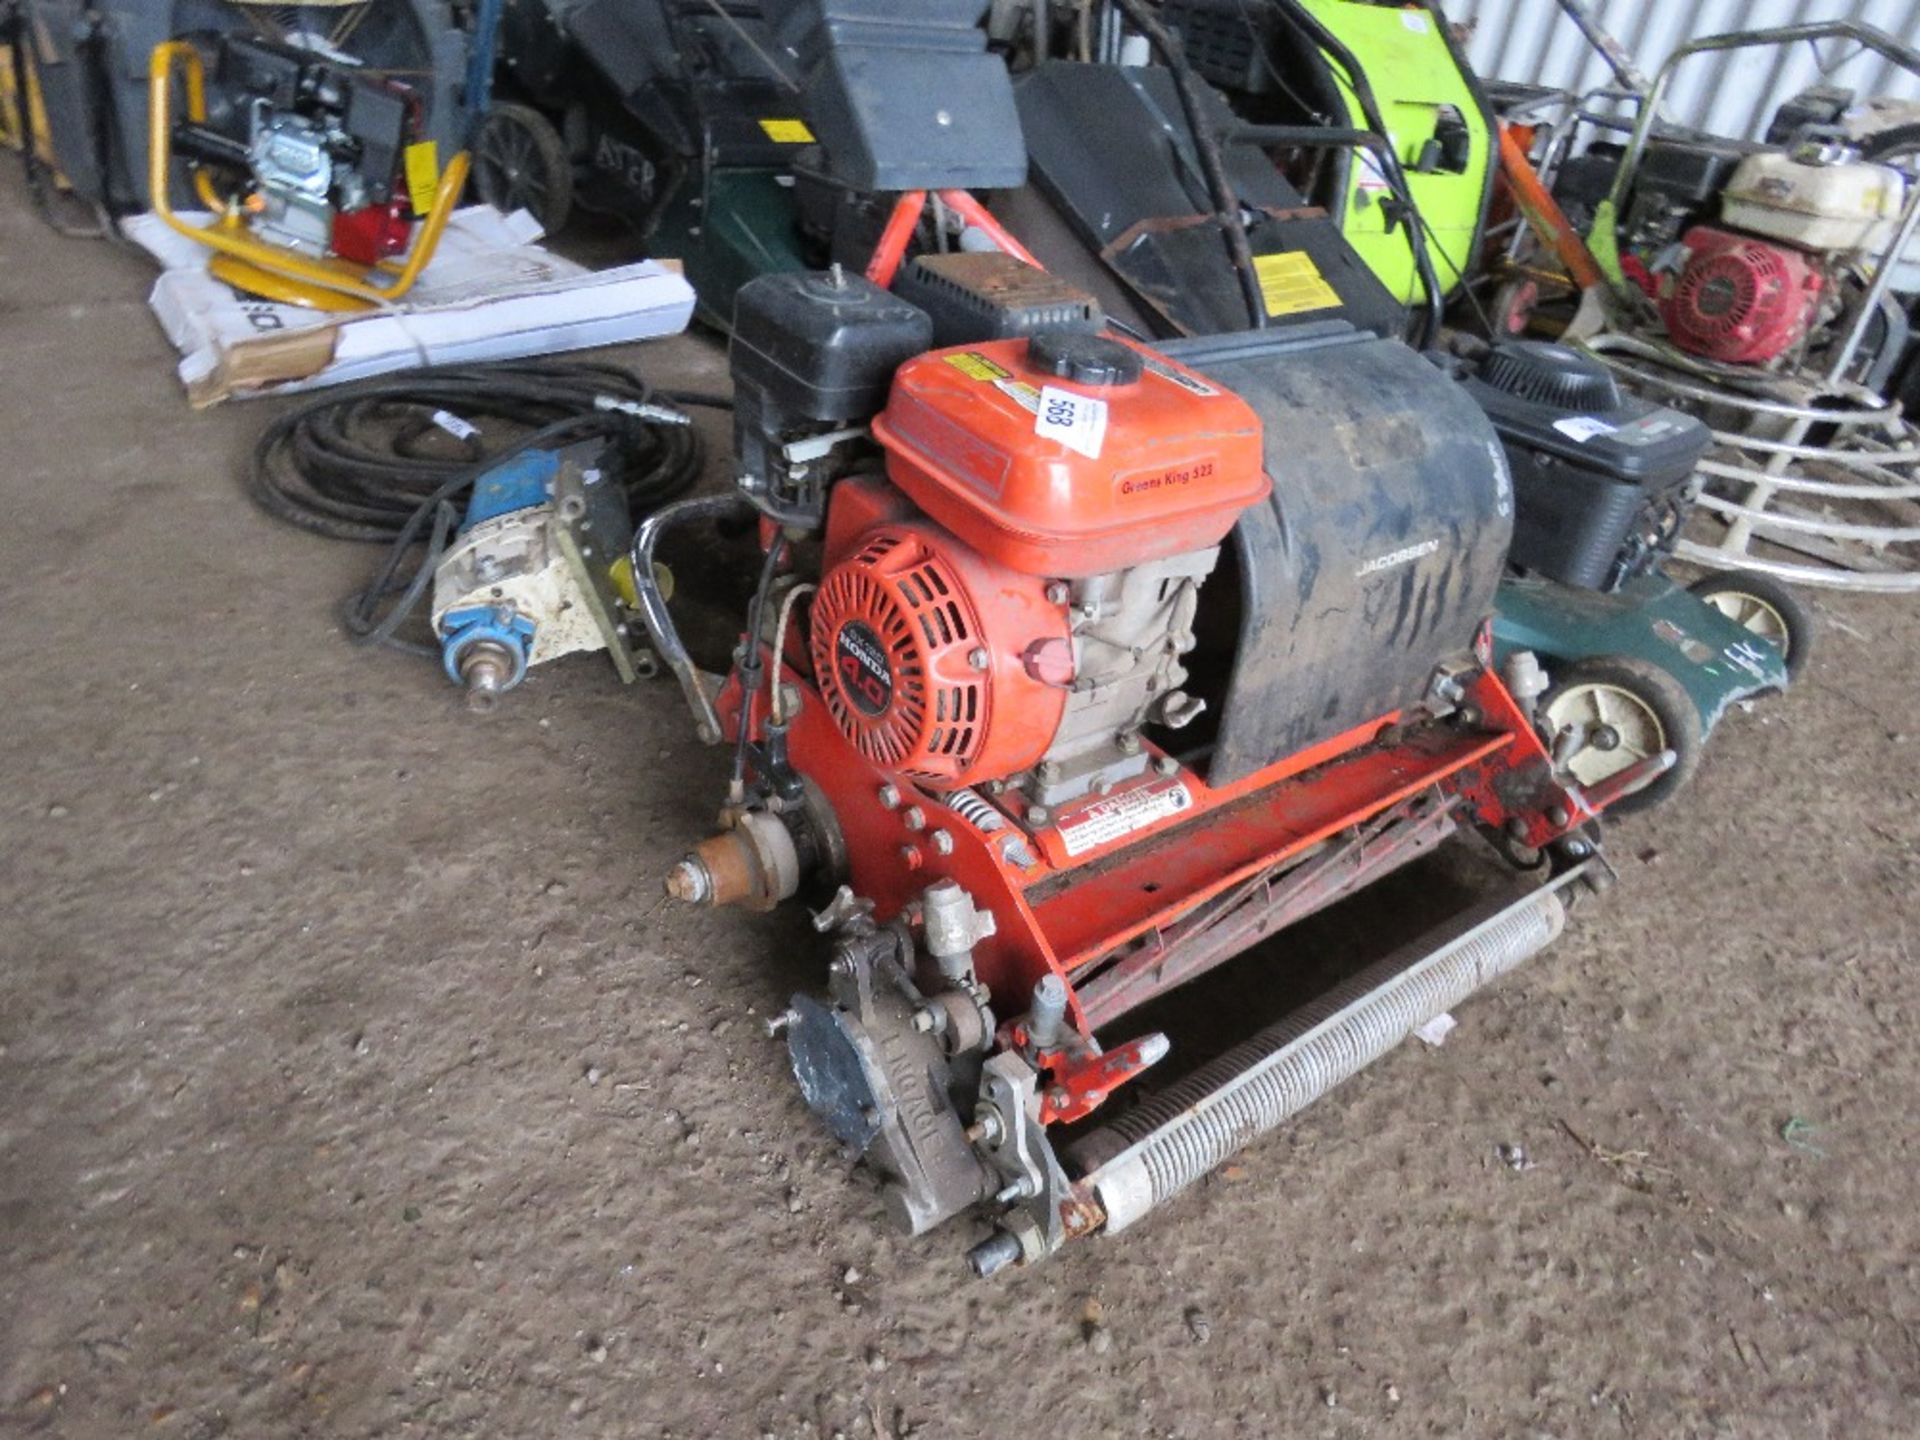 JACOBSEN PETROL ENGINED GREEN KING 522 CYLINDER LAWN MOWERN HONDA ENGINE, NO BOX. THIS LOT IS SOL